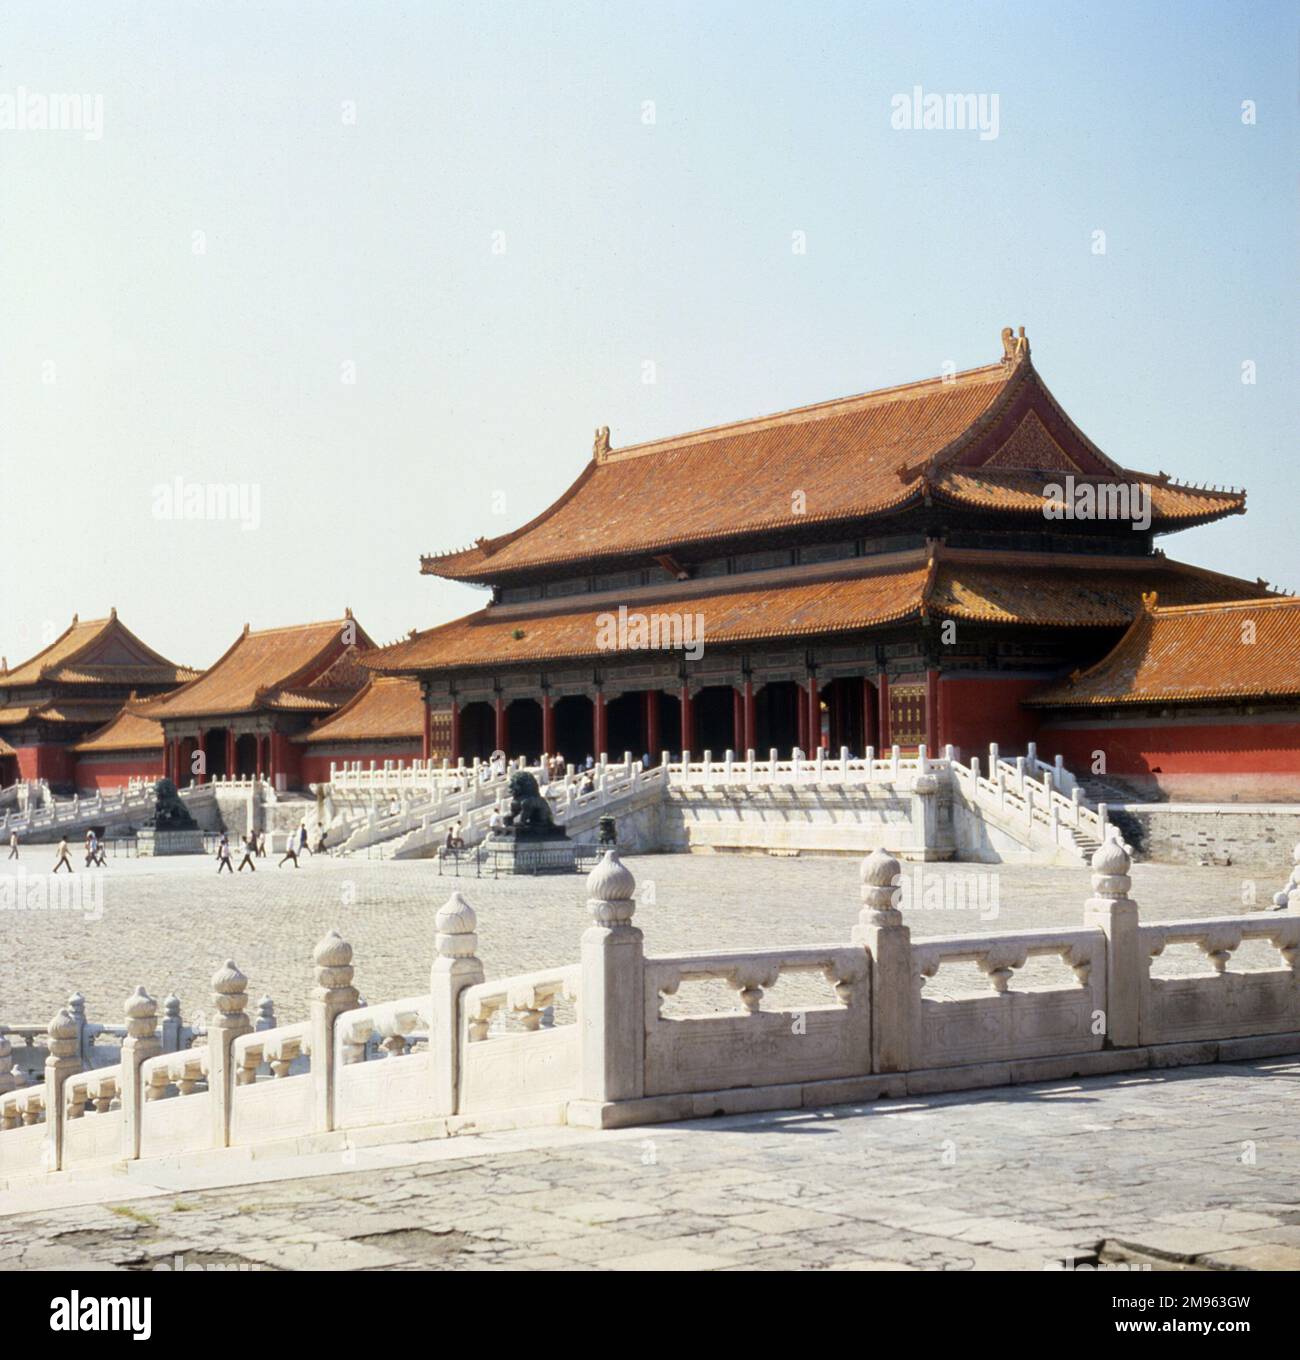 Palace of Go-Gung, part of the Forbidden City. Stock Photo